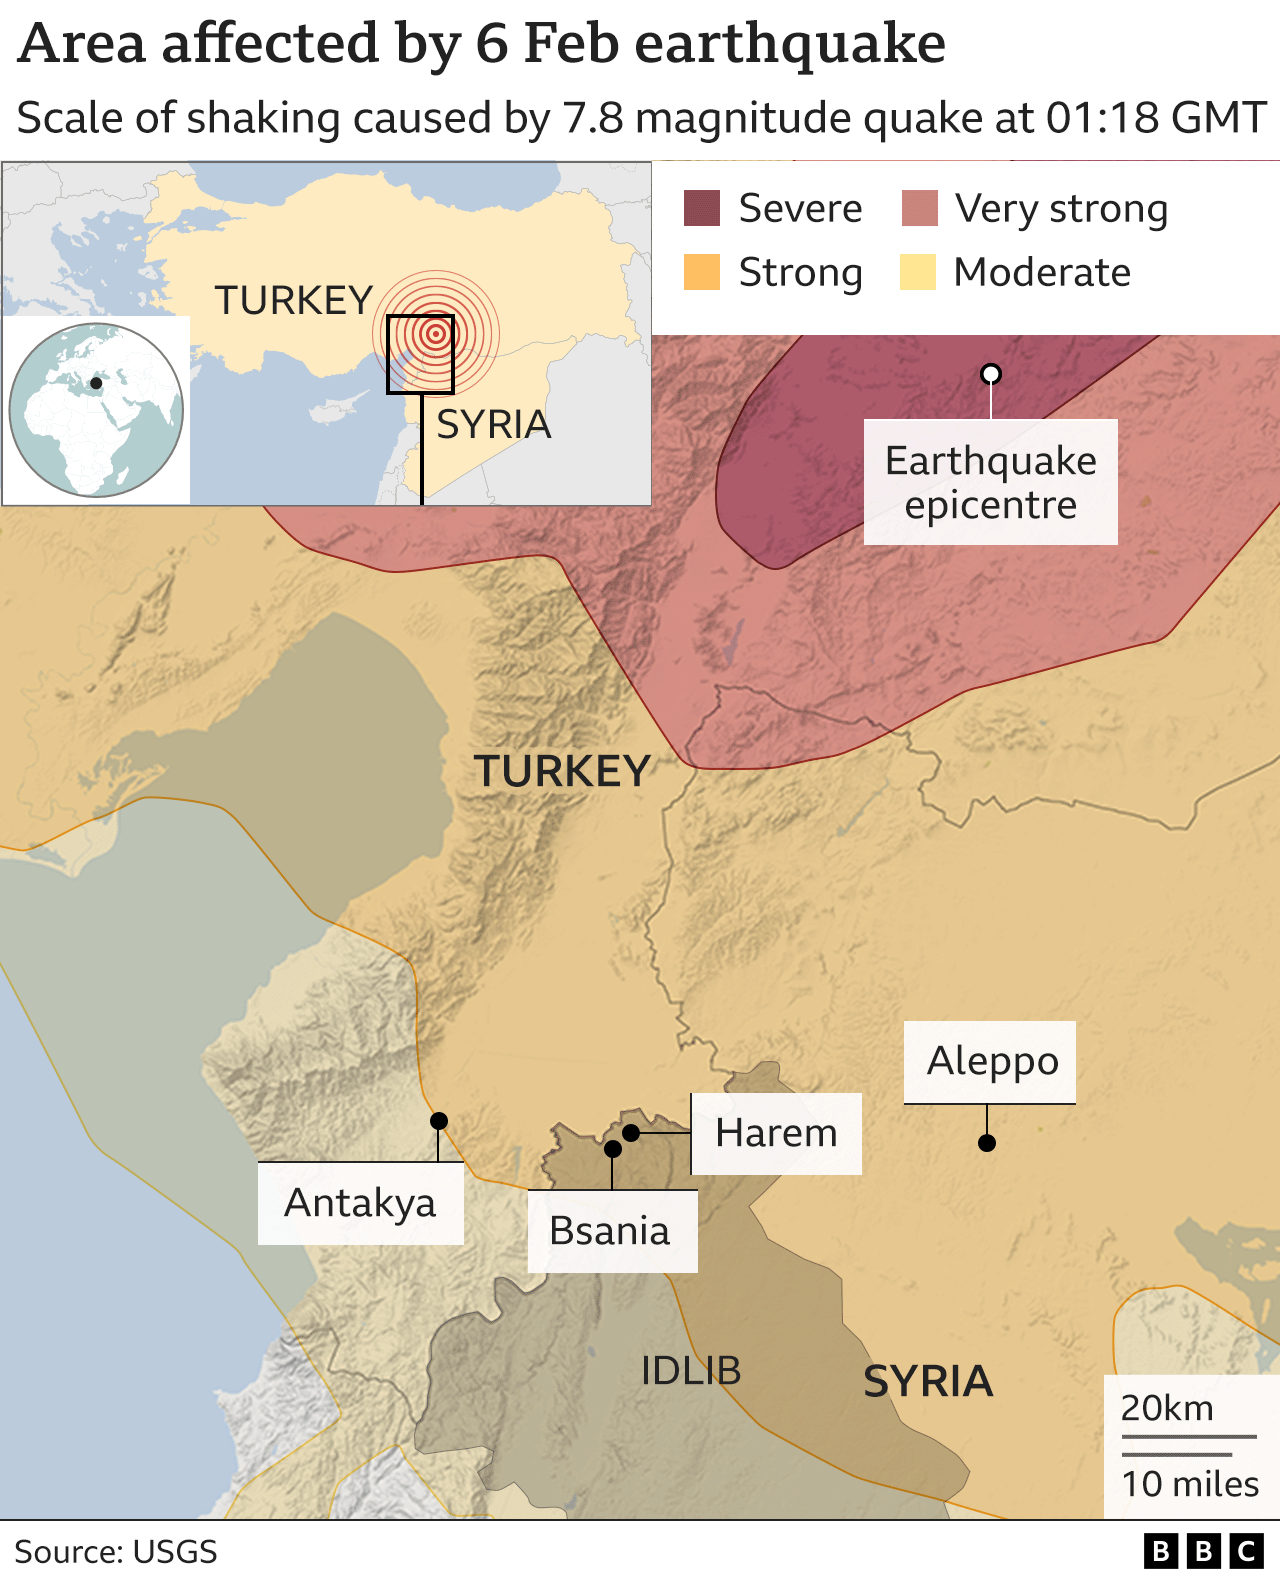 Map showing the area of the Turkey-Syria border most affected by the earthquake, showing locations of Bsania and Harem in Syria and Atakya in Turkey